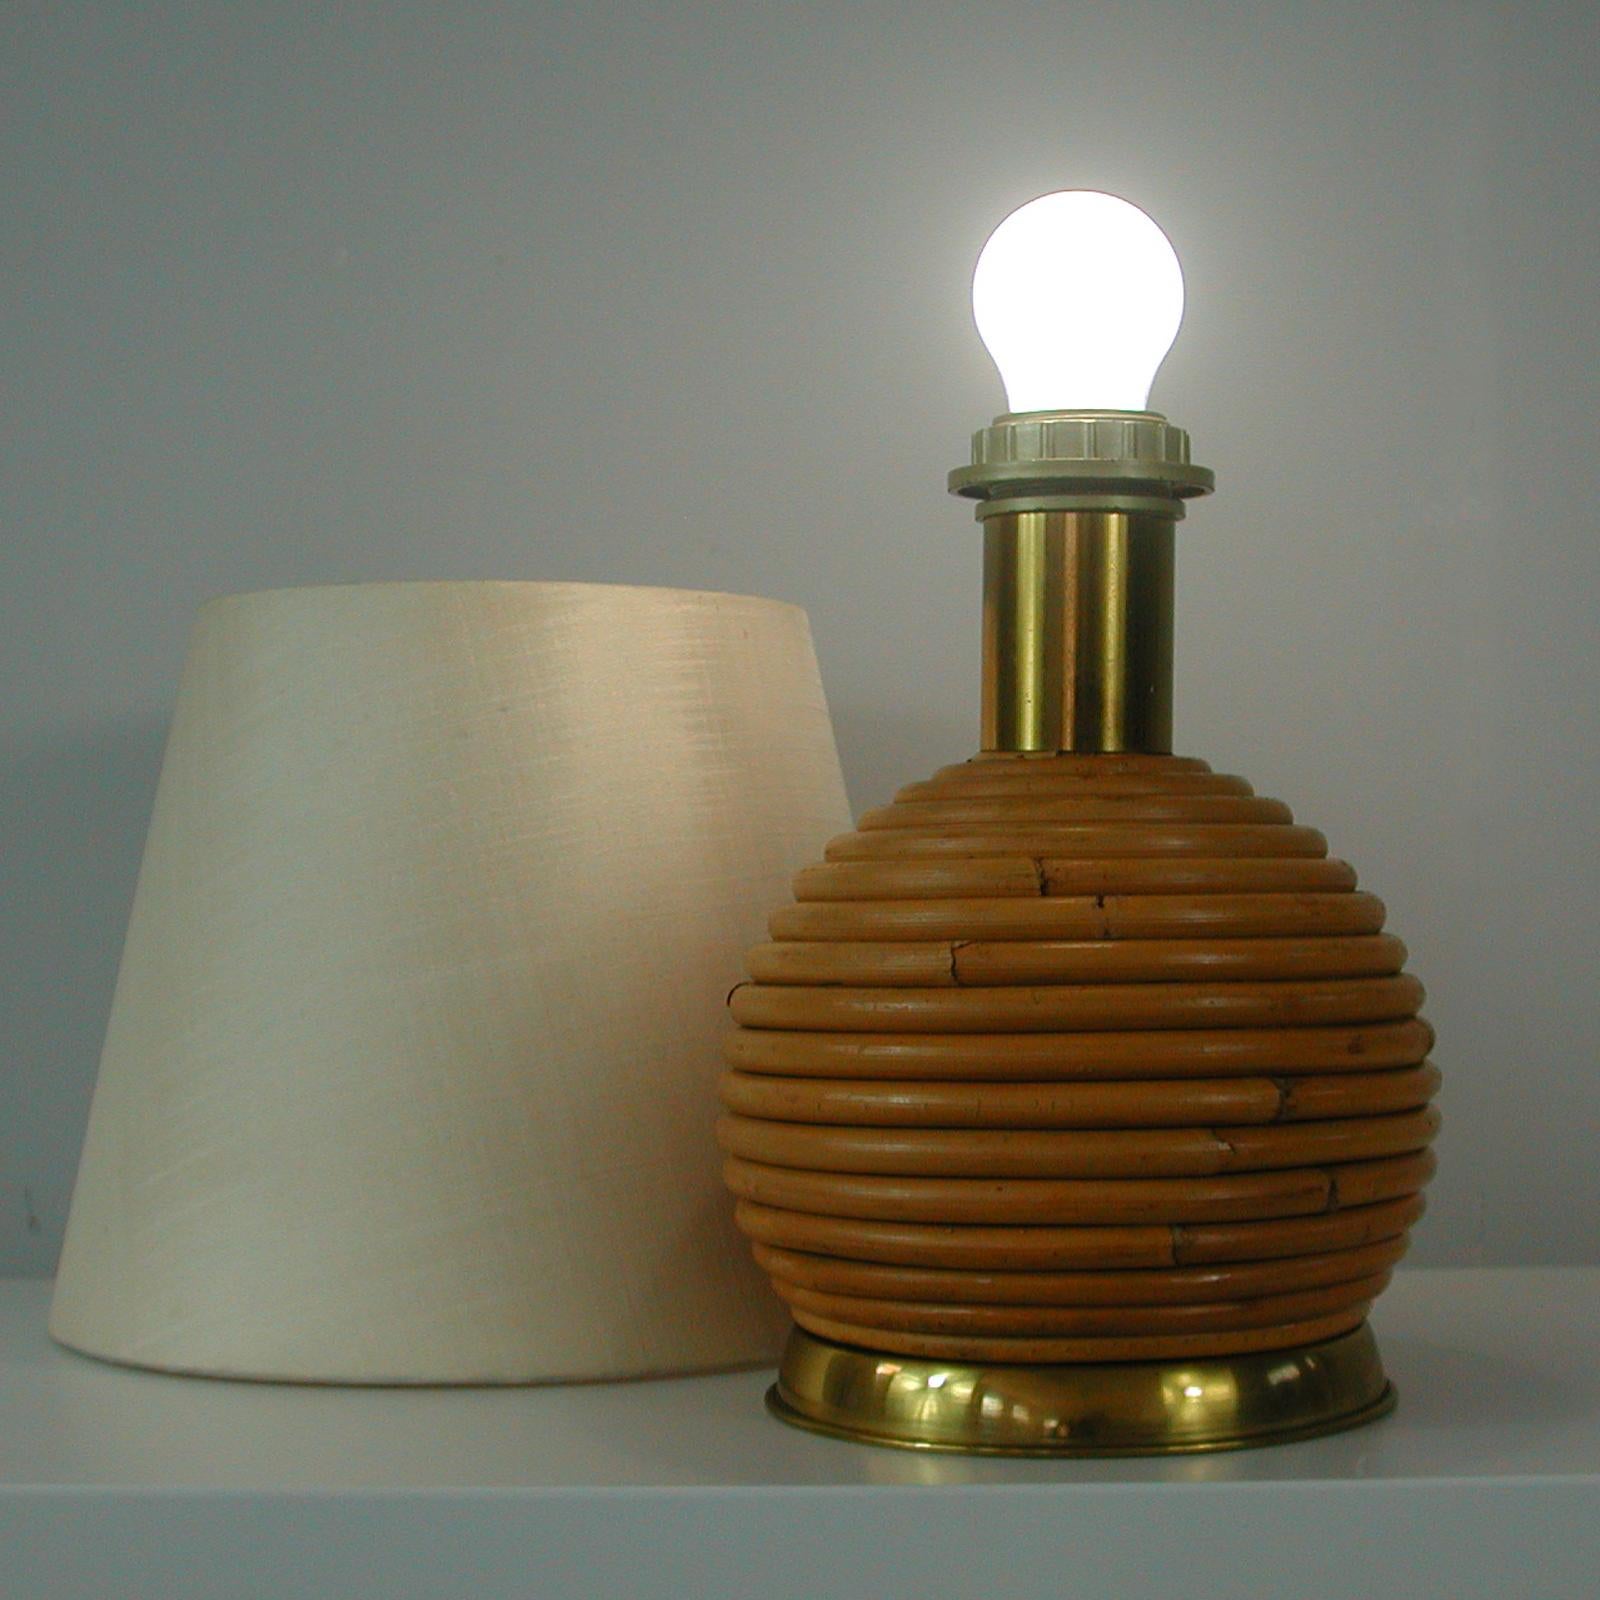 Midcentury Bamboo and Brass Globe Table Lamp, Vivai del Sud attr. Italy 1960s For Sale 4